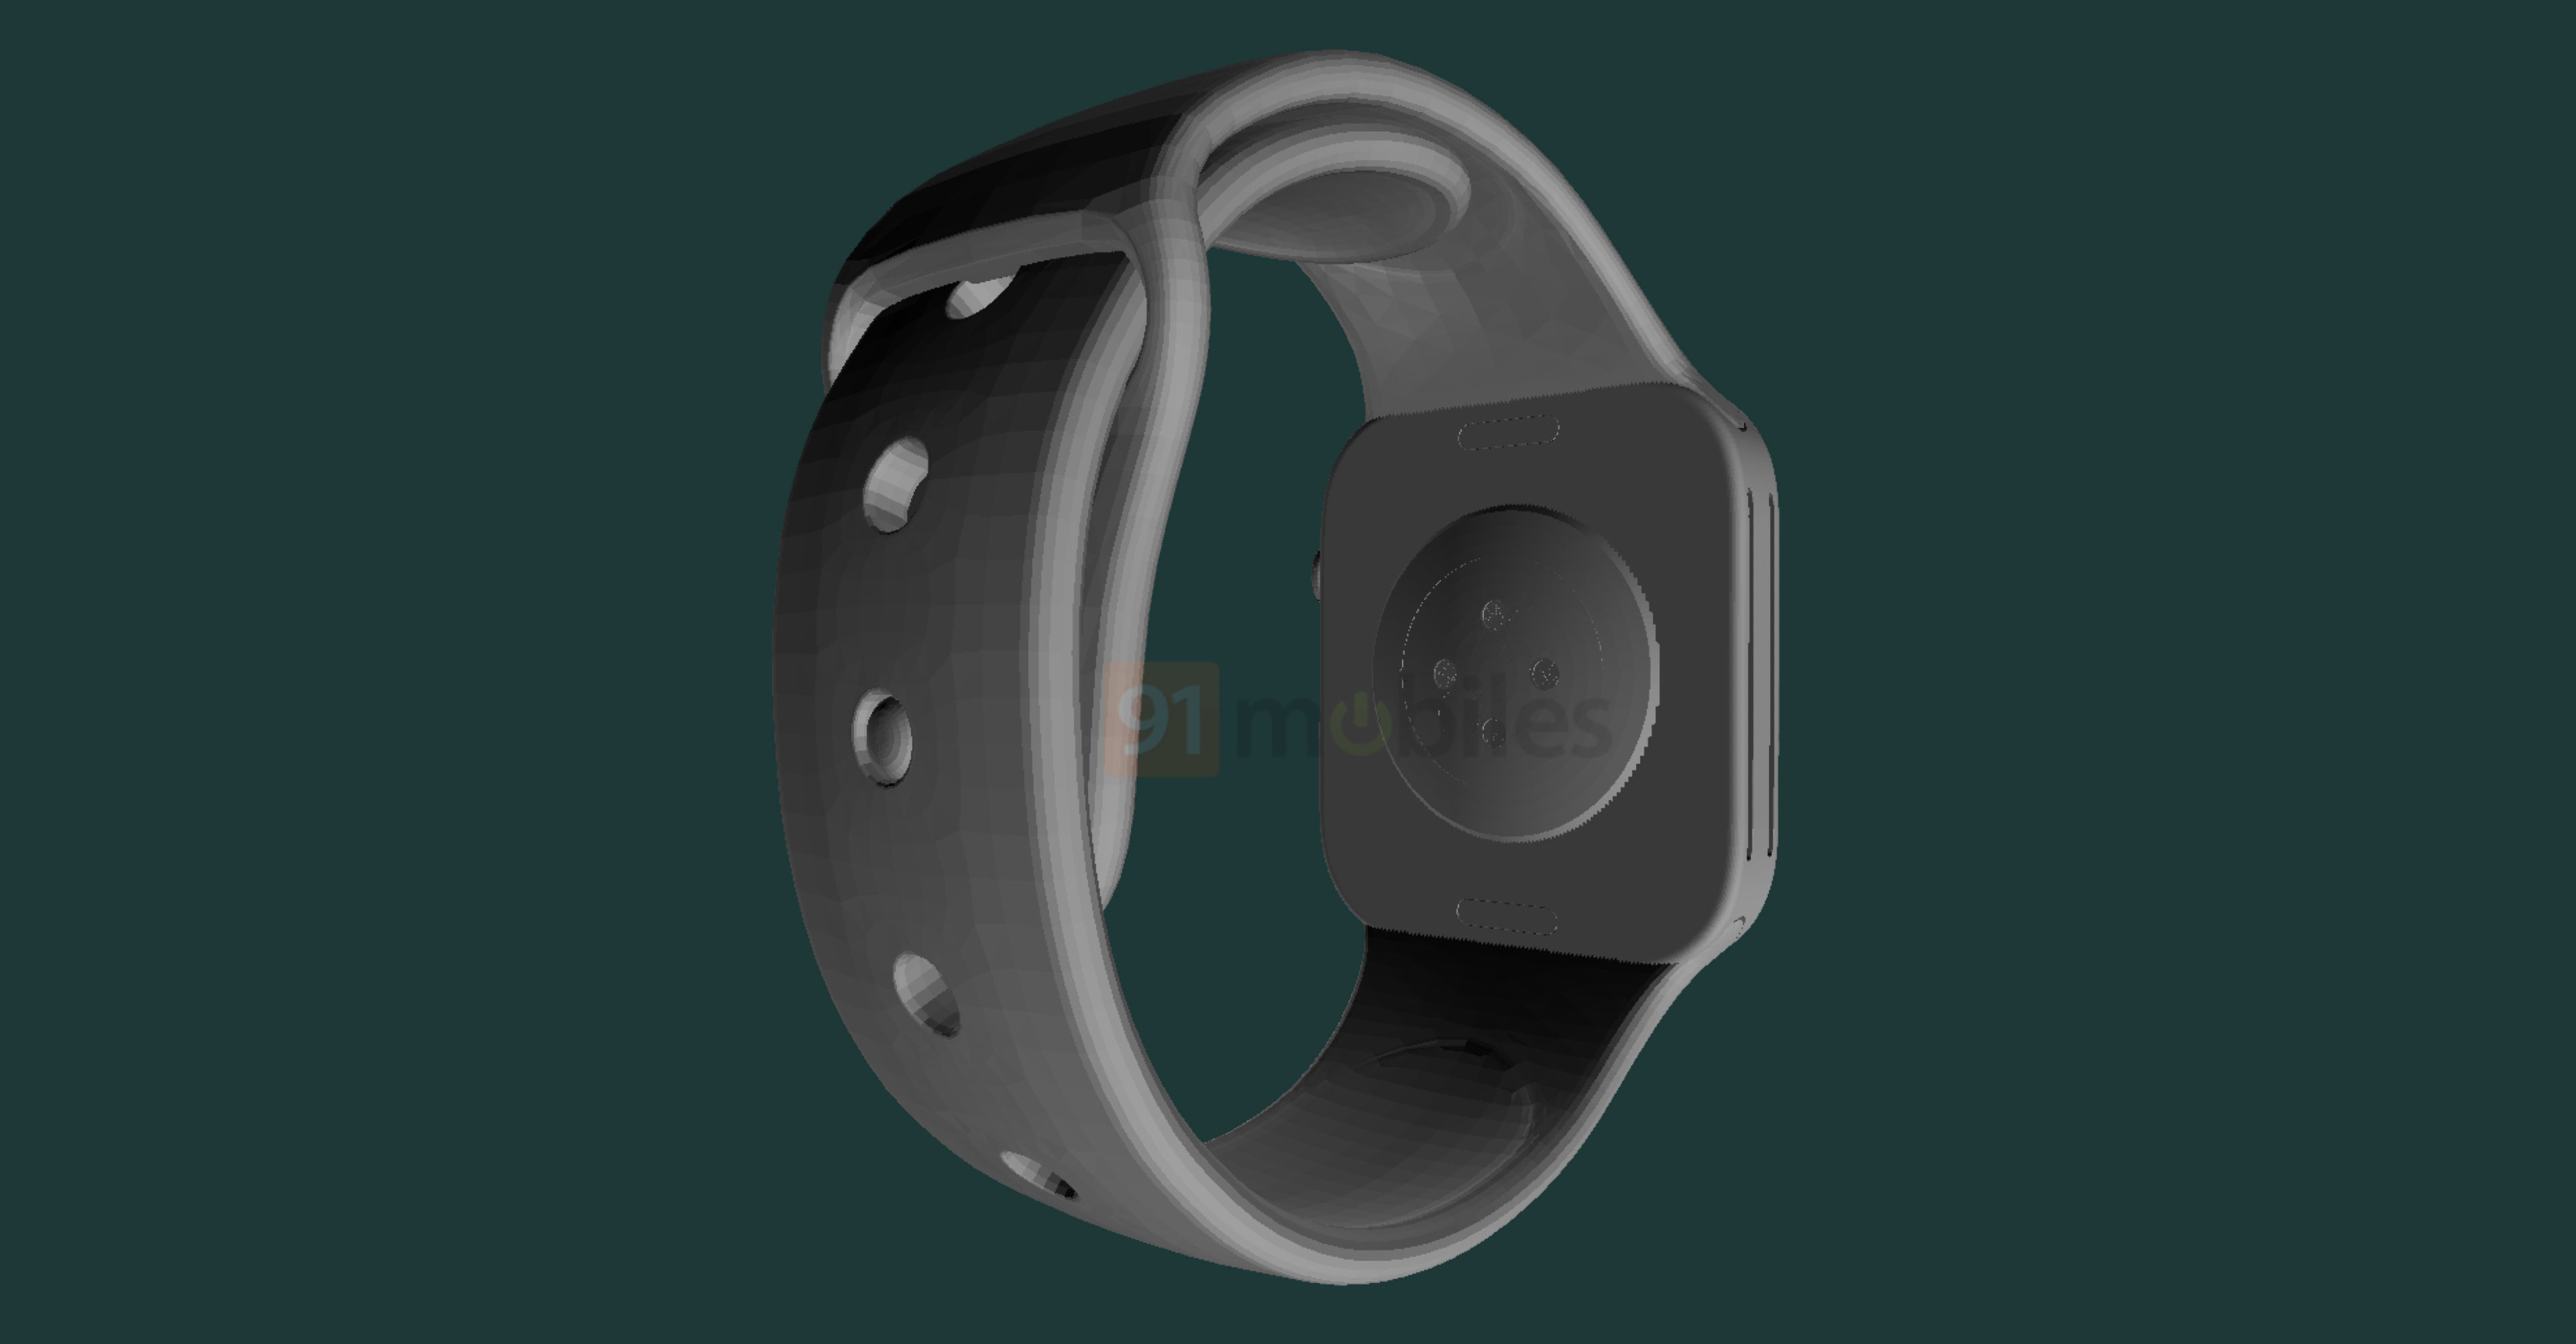 Exclusive] Apple Watch Pro design revealed through CAD renders